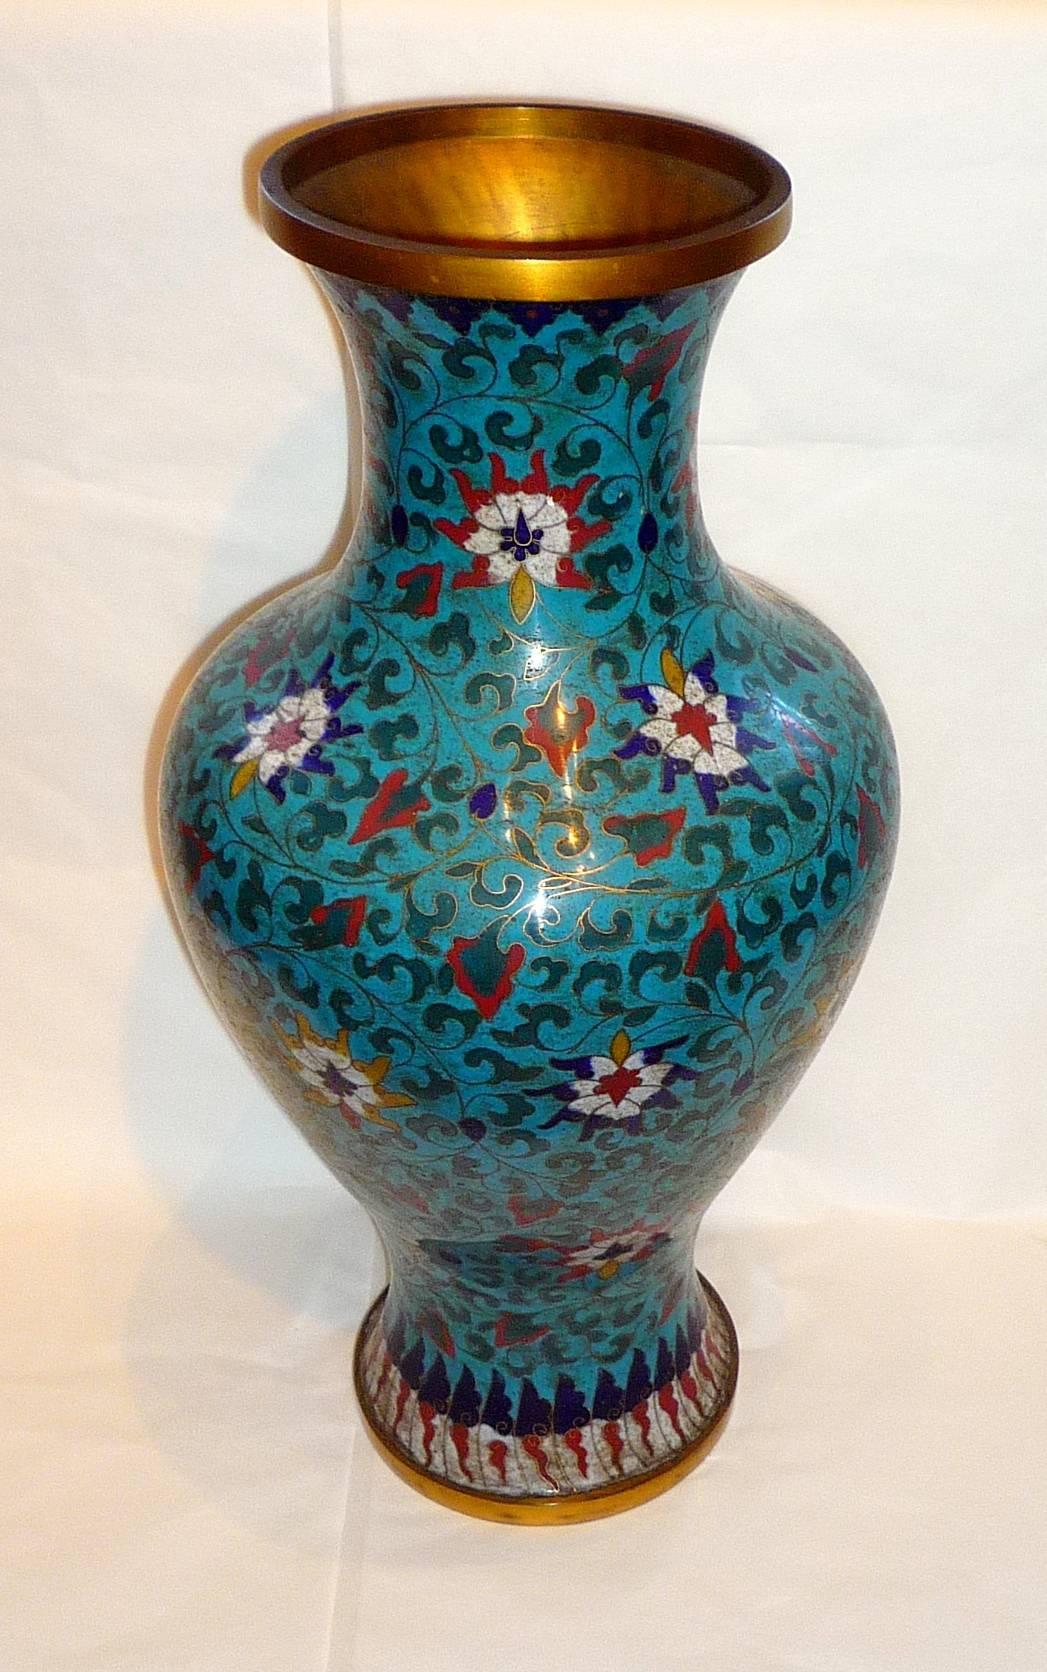 A pair of large 19th century Chinese cloisonné on blue back ground vases, with an apocryphal mark underneath.
They can be mounted as lamps.